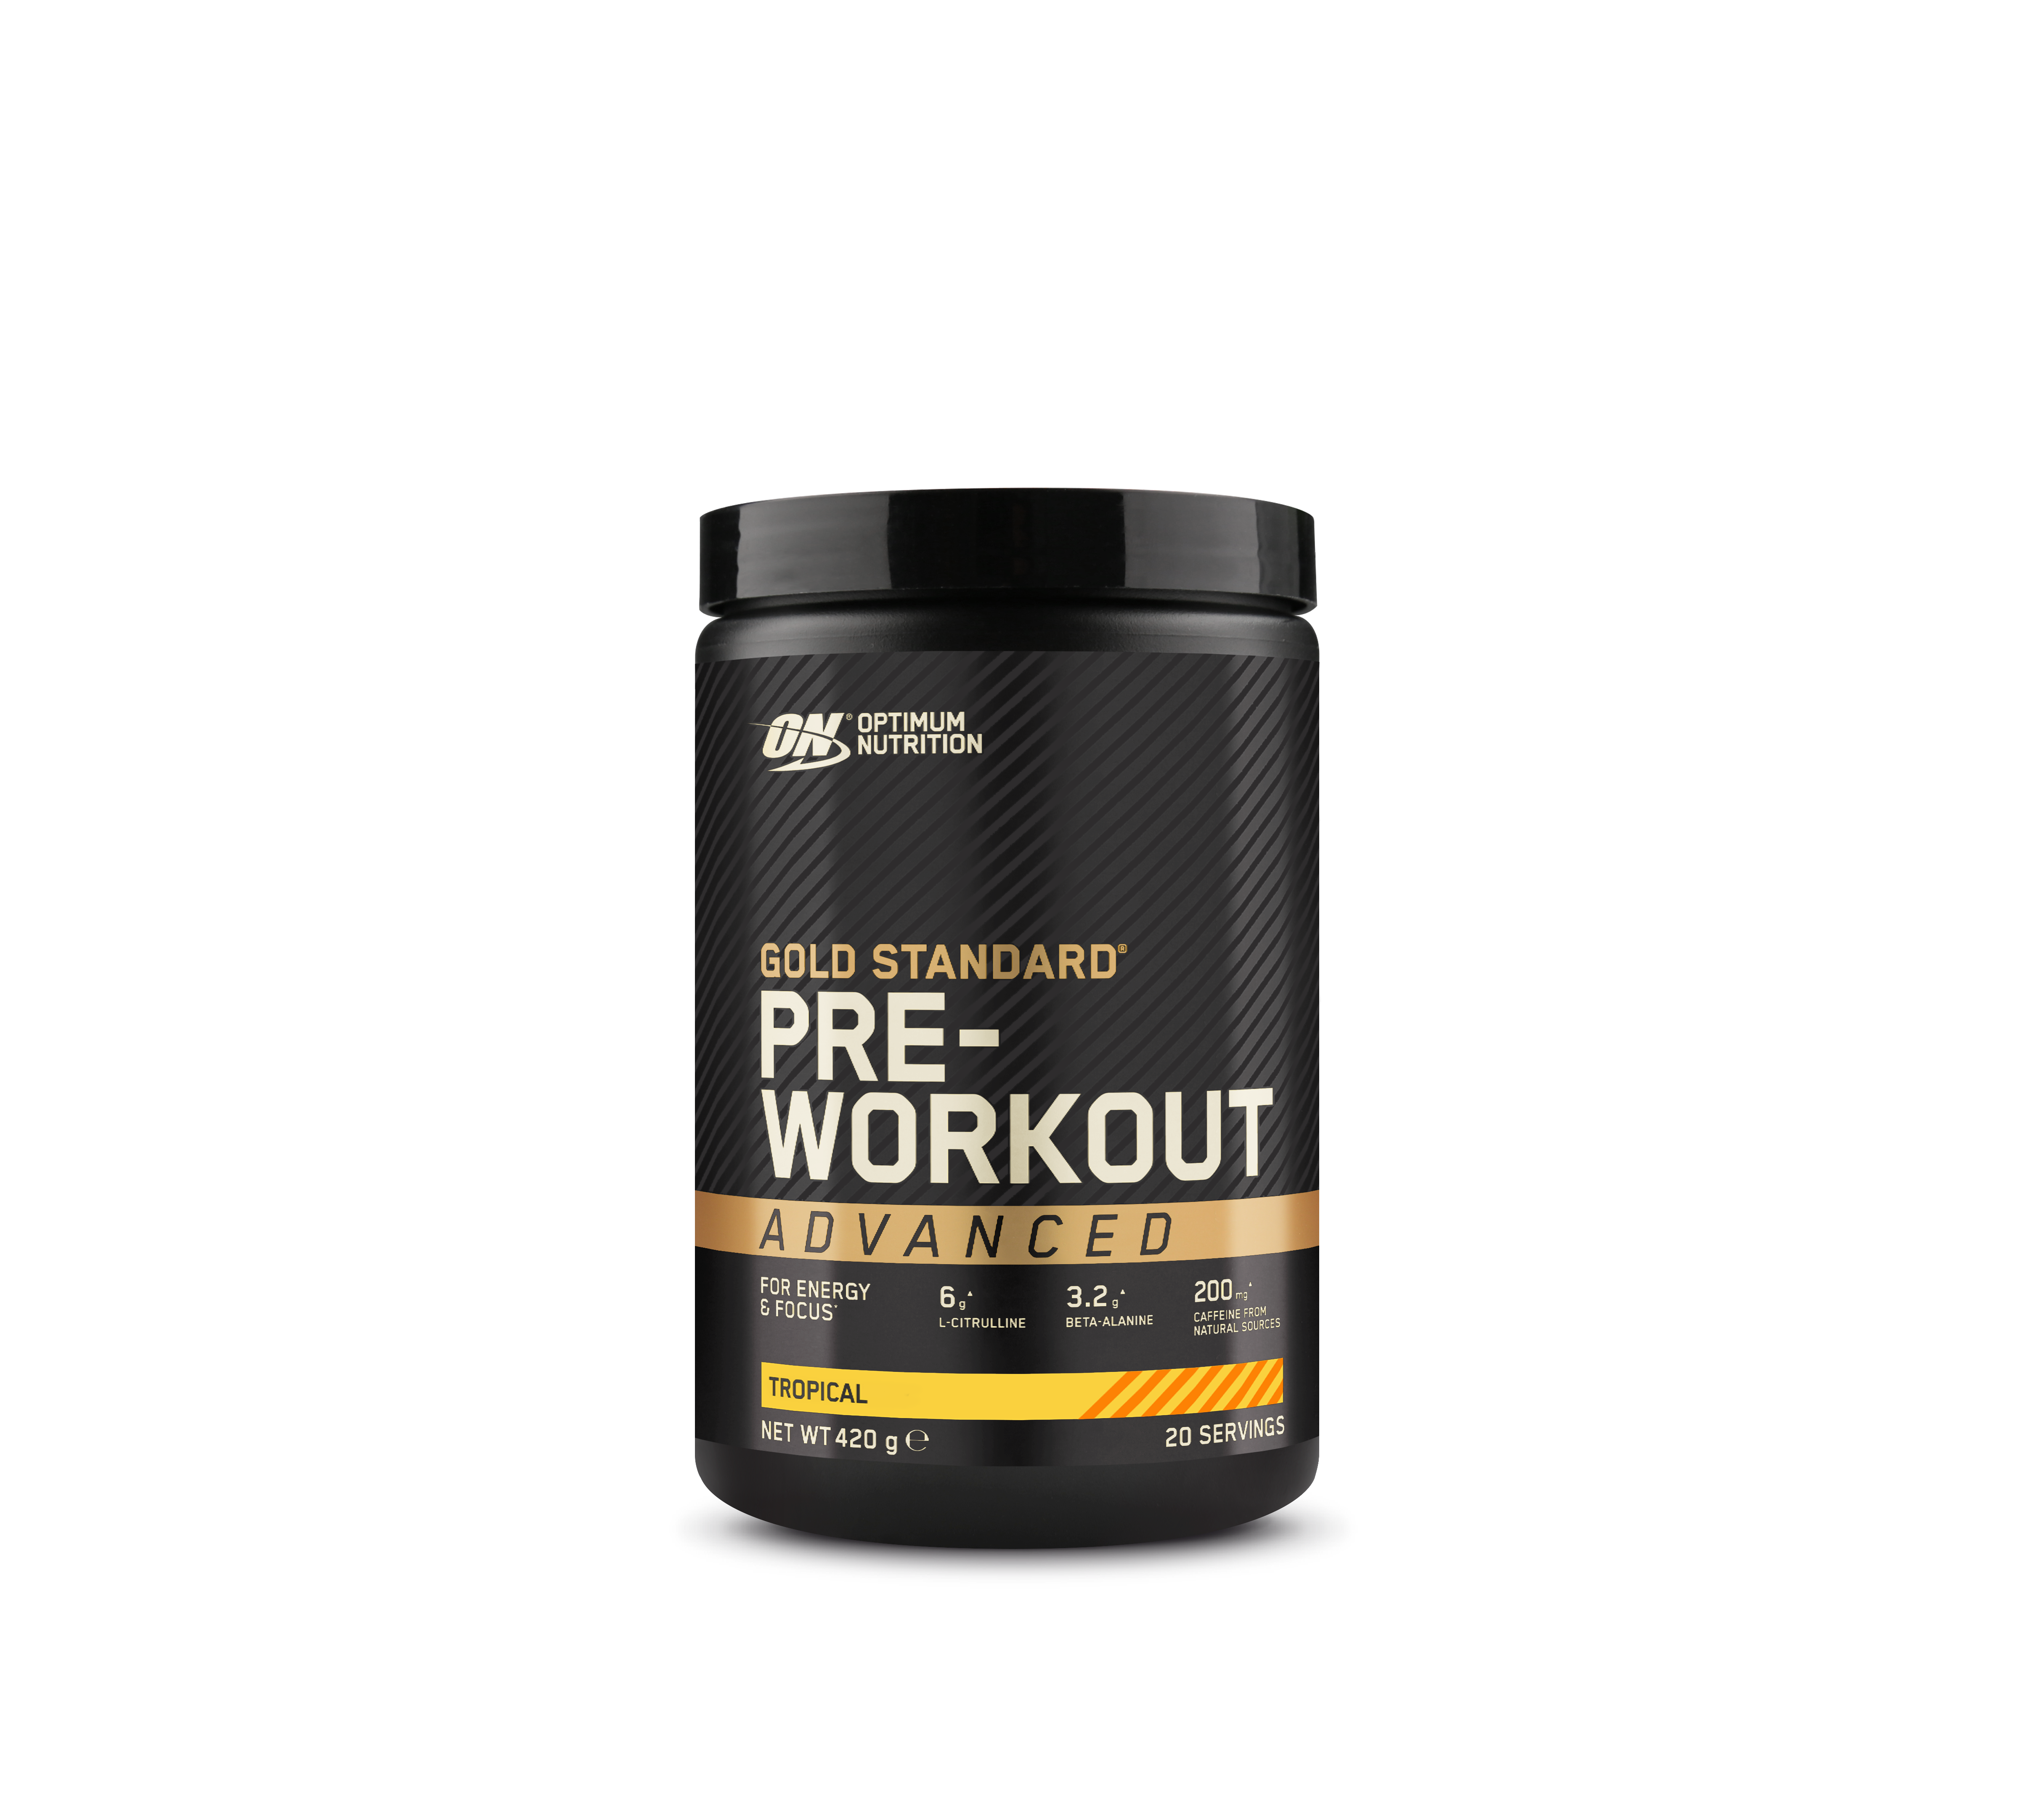 GOLD STANDARD PRE-WORKOUT Advanced tropical - ON